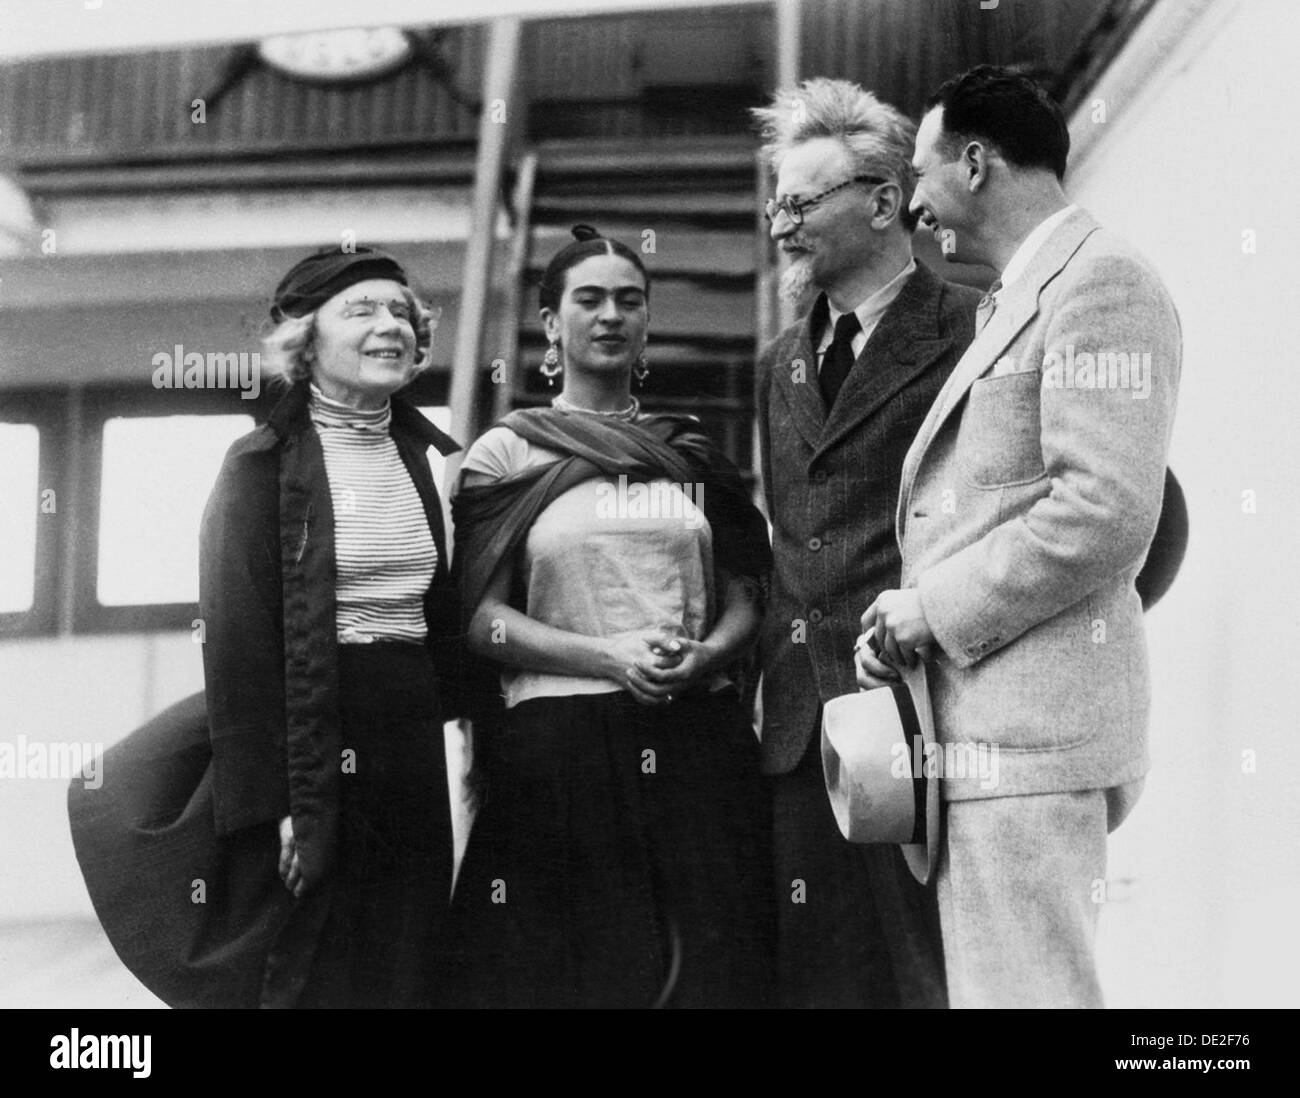 Leon Trotsky with his wife Natalia Sedova and Mexican artist Frida Kahlo, 1937. Artist: Unknown Stock Photo